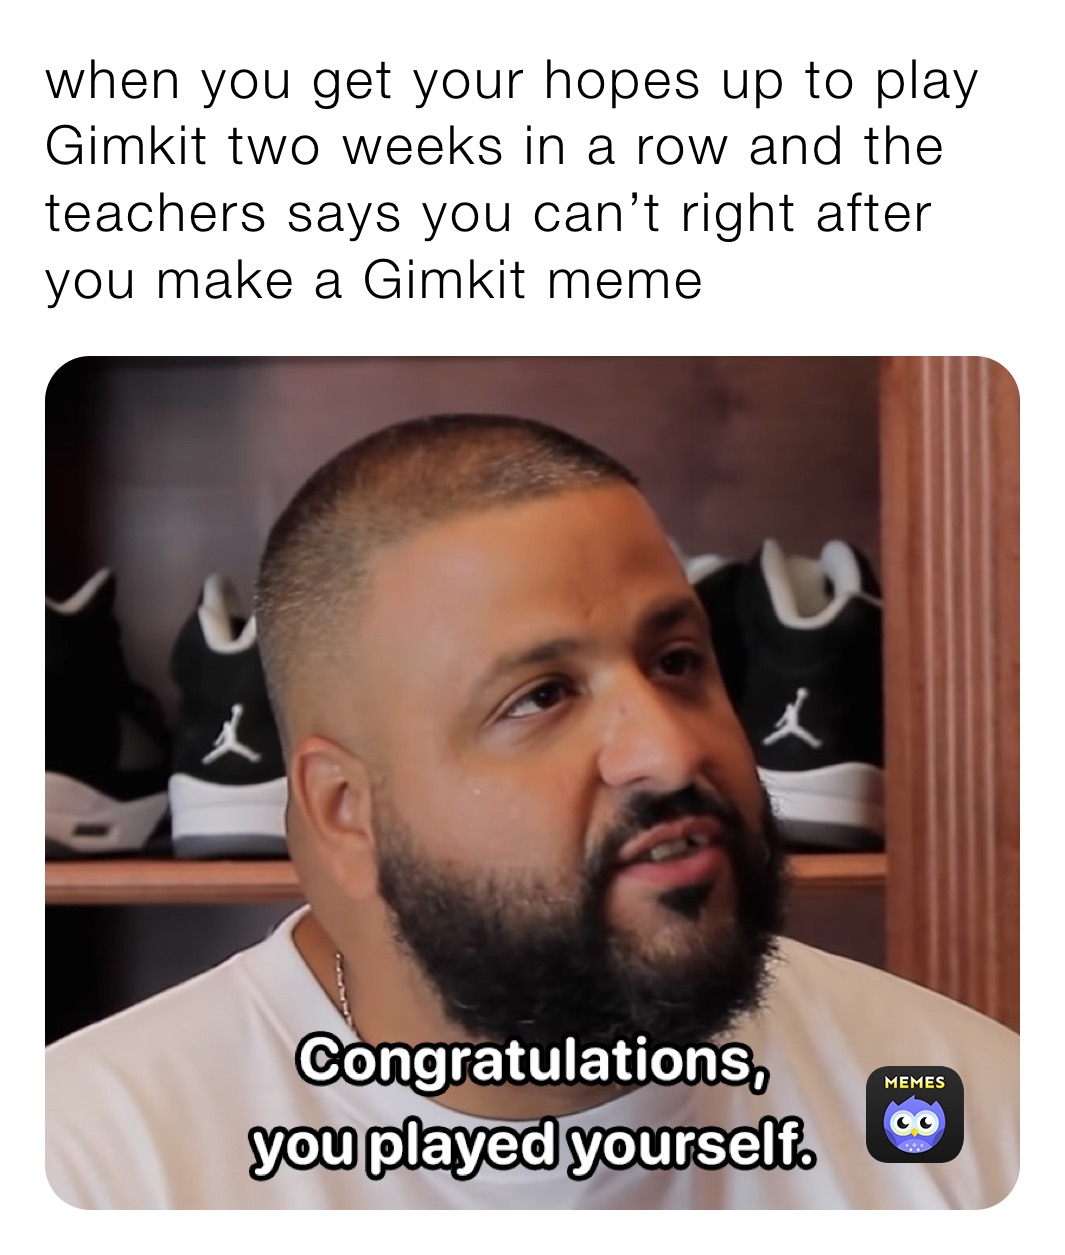 when you get your hopes up to play Gimkit two weeks in a row and the teachers says you can’t right after you make a Gimkit meme